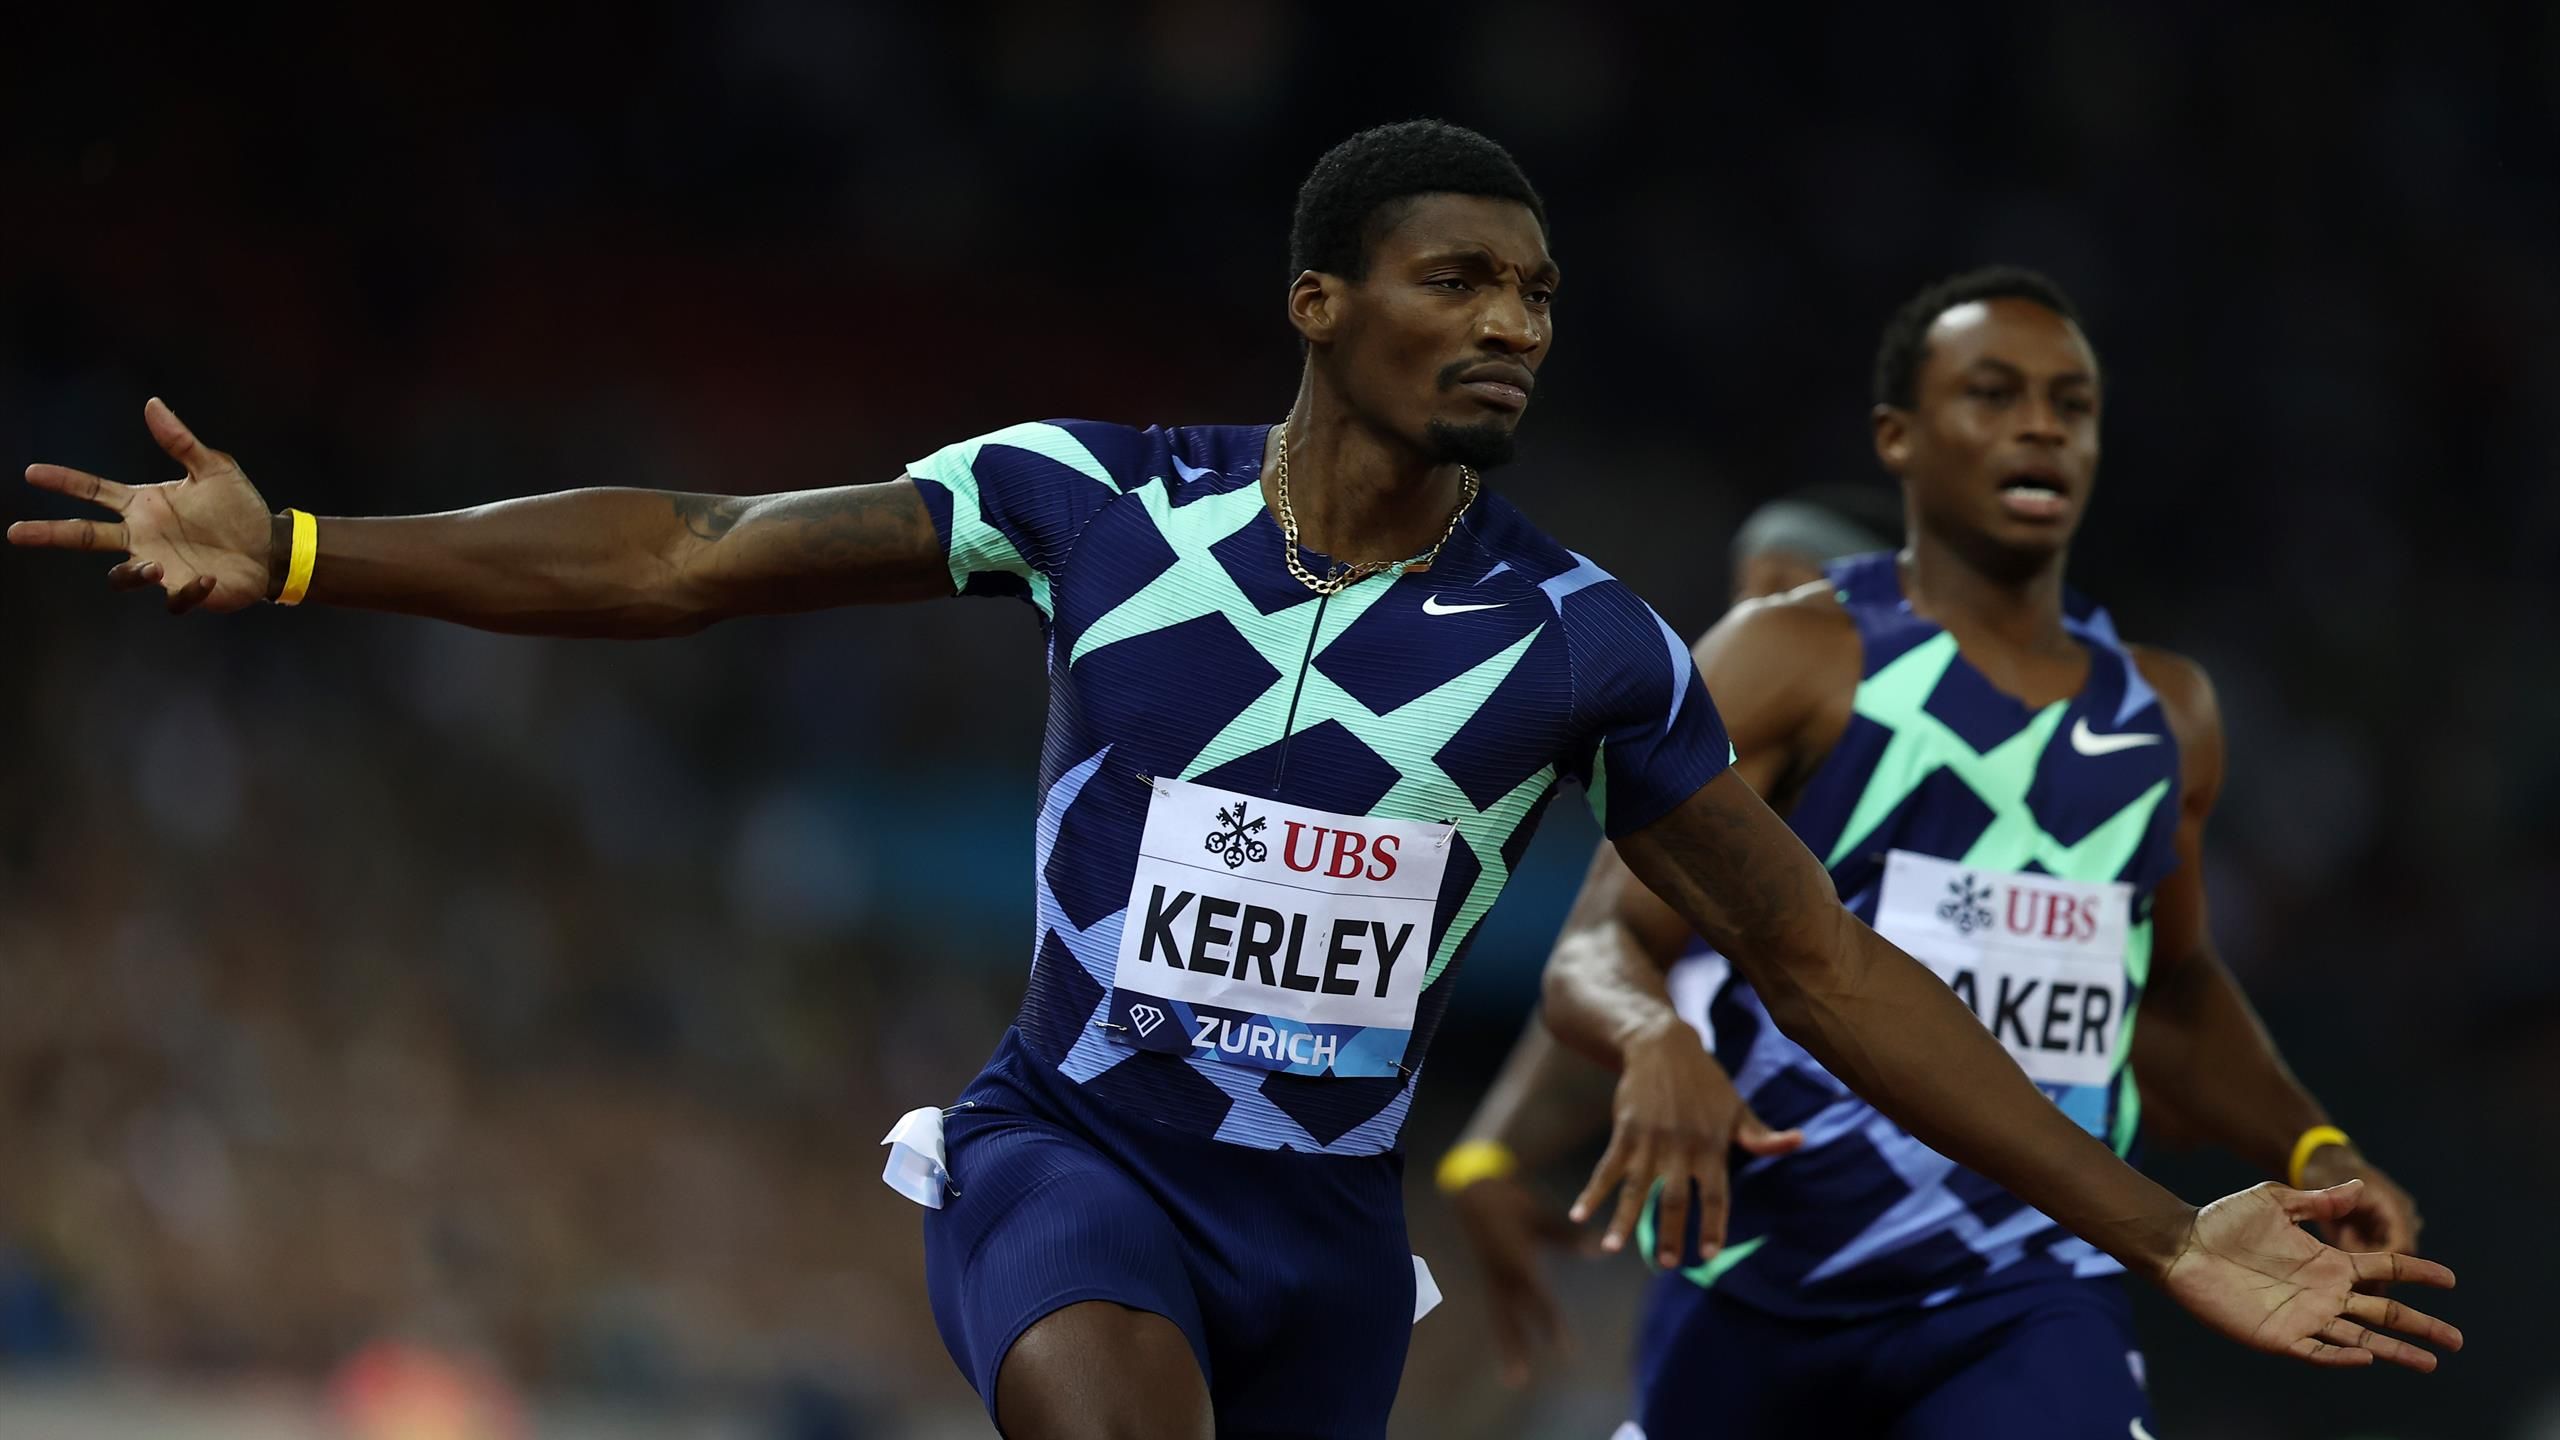 Fred Kerley edges past Andre de Grasse and Ronnie Baker to win men's